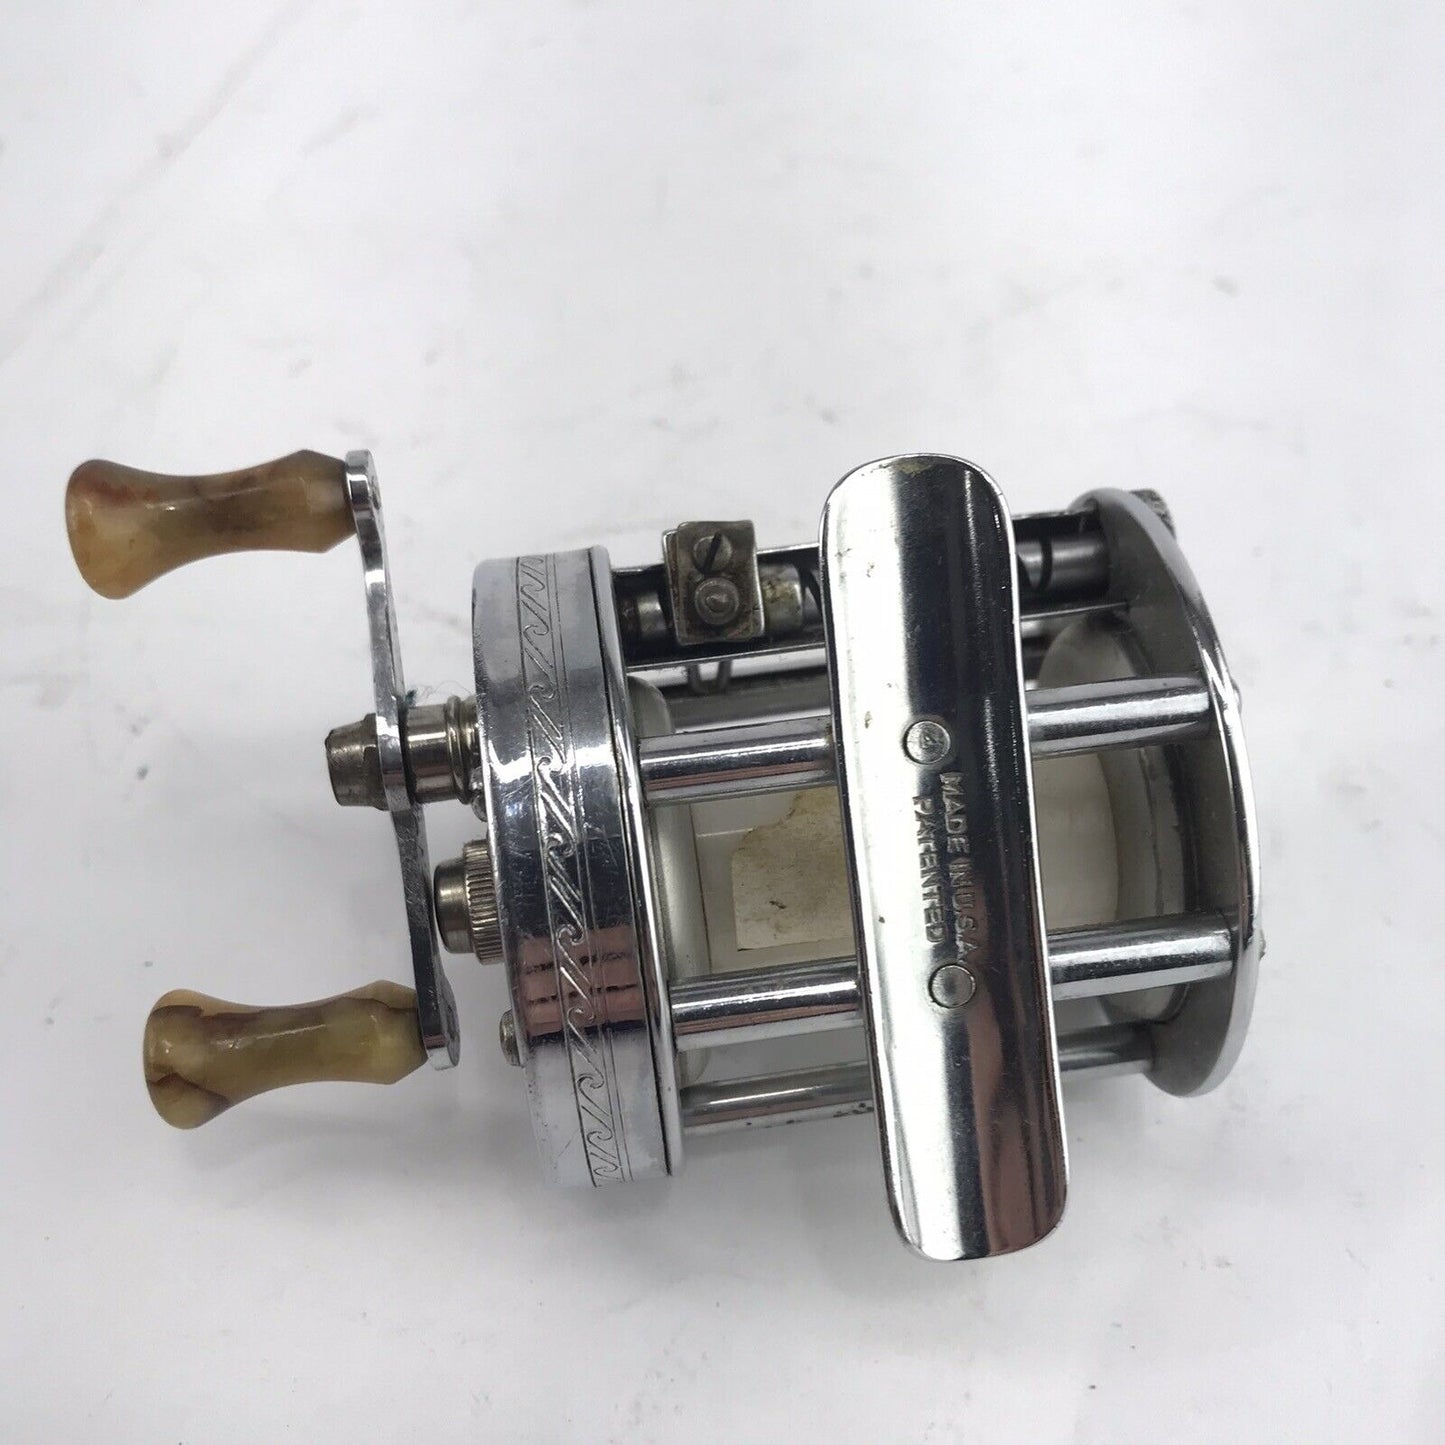 South Bend Perfectoreno Model A Fishing Reel WORKS GREAT!